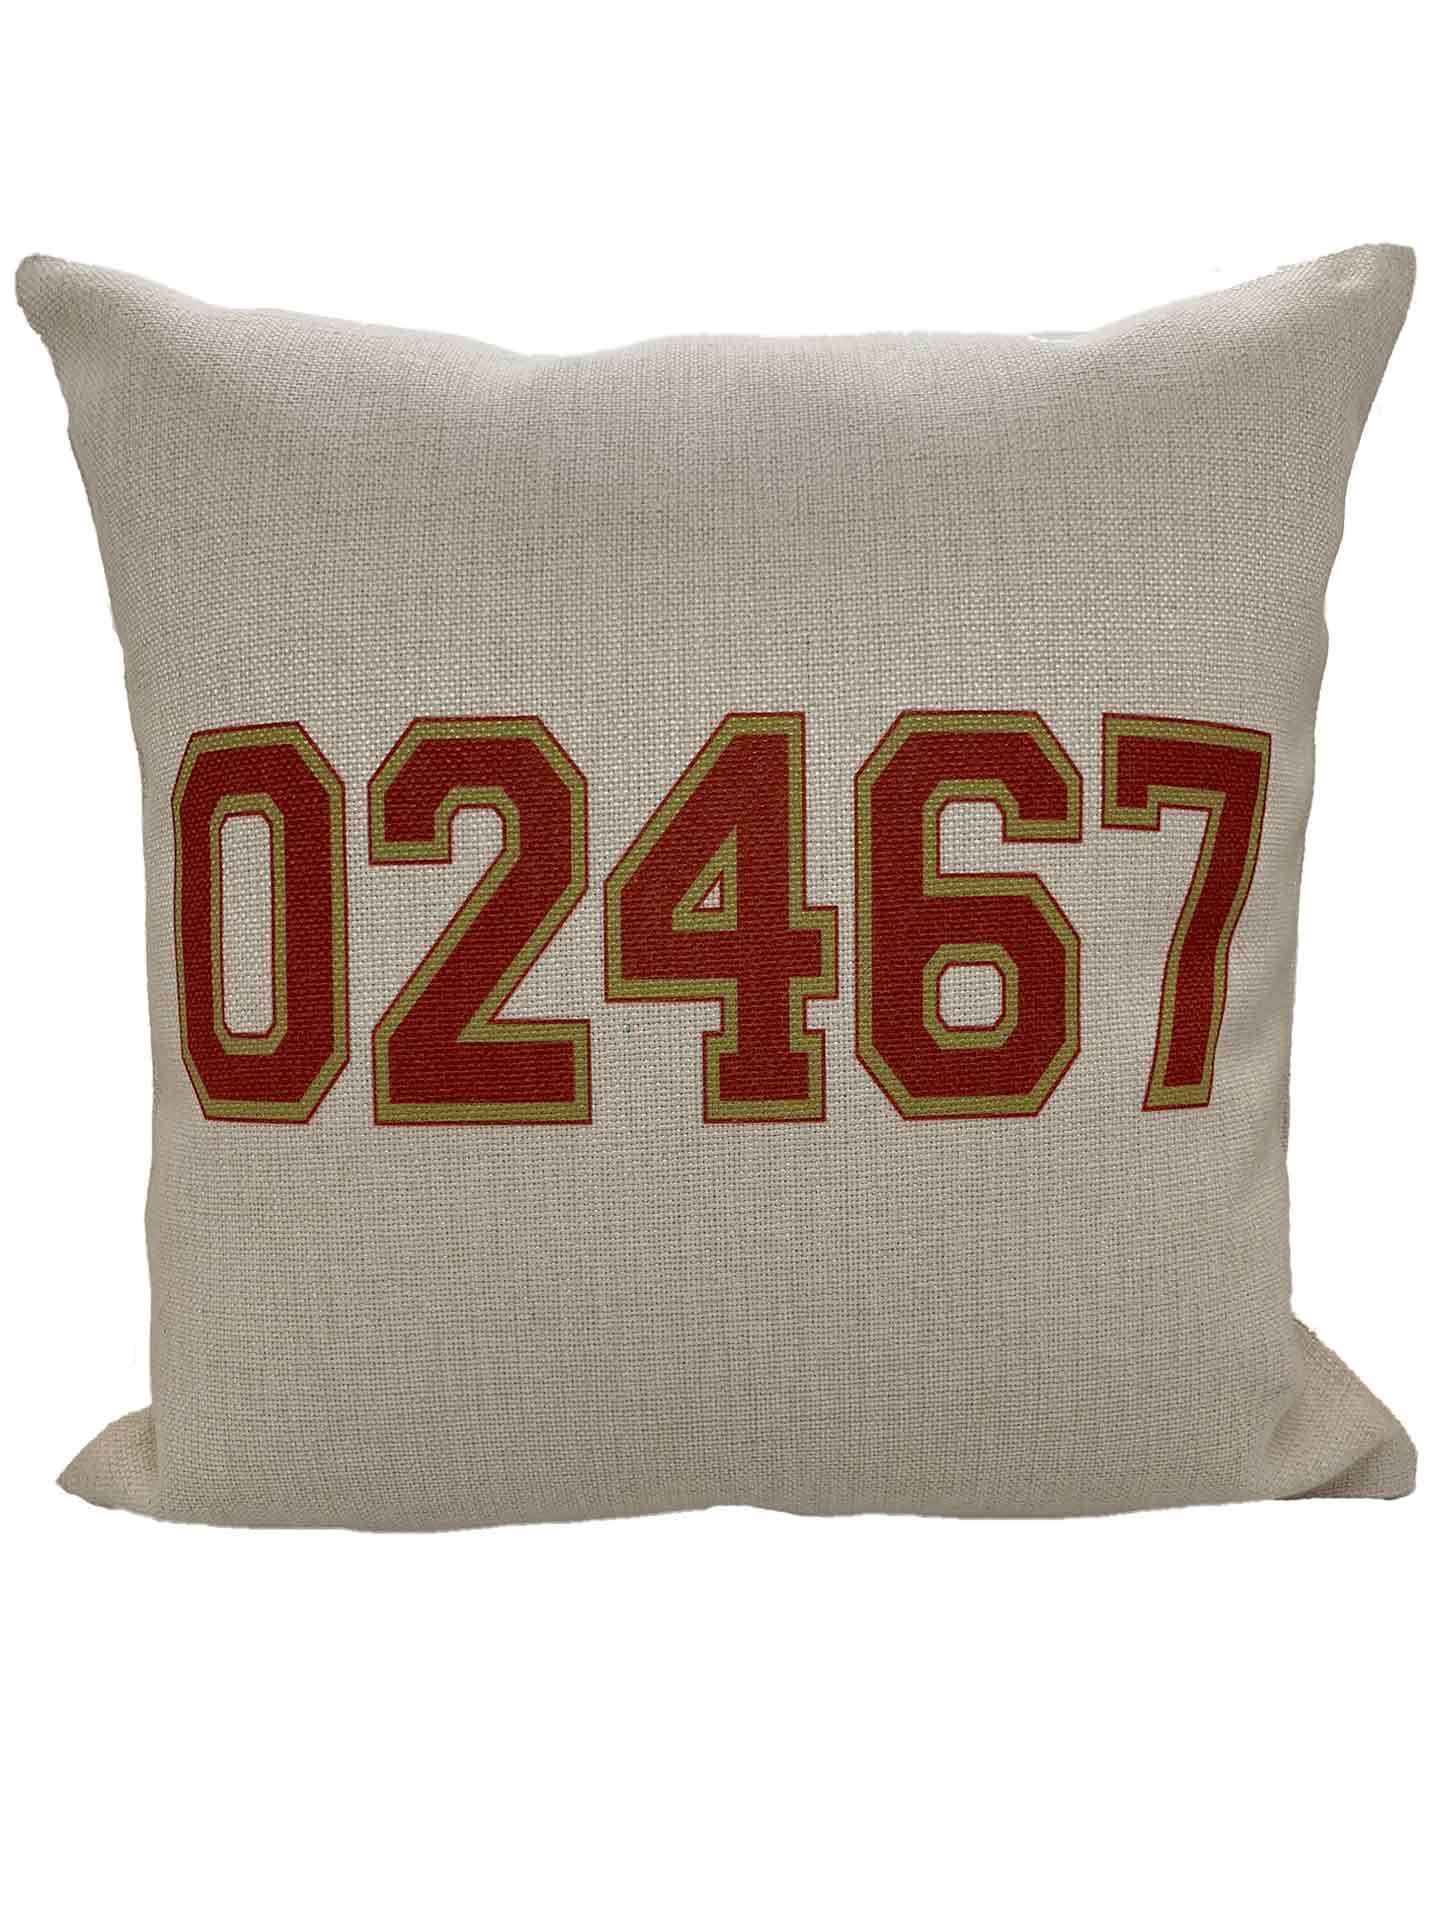 Home and Away Pillow - PolyCanvas